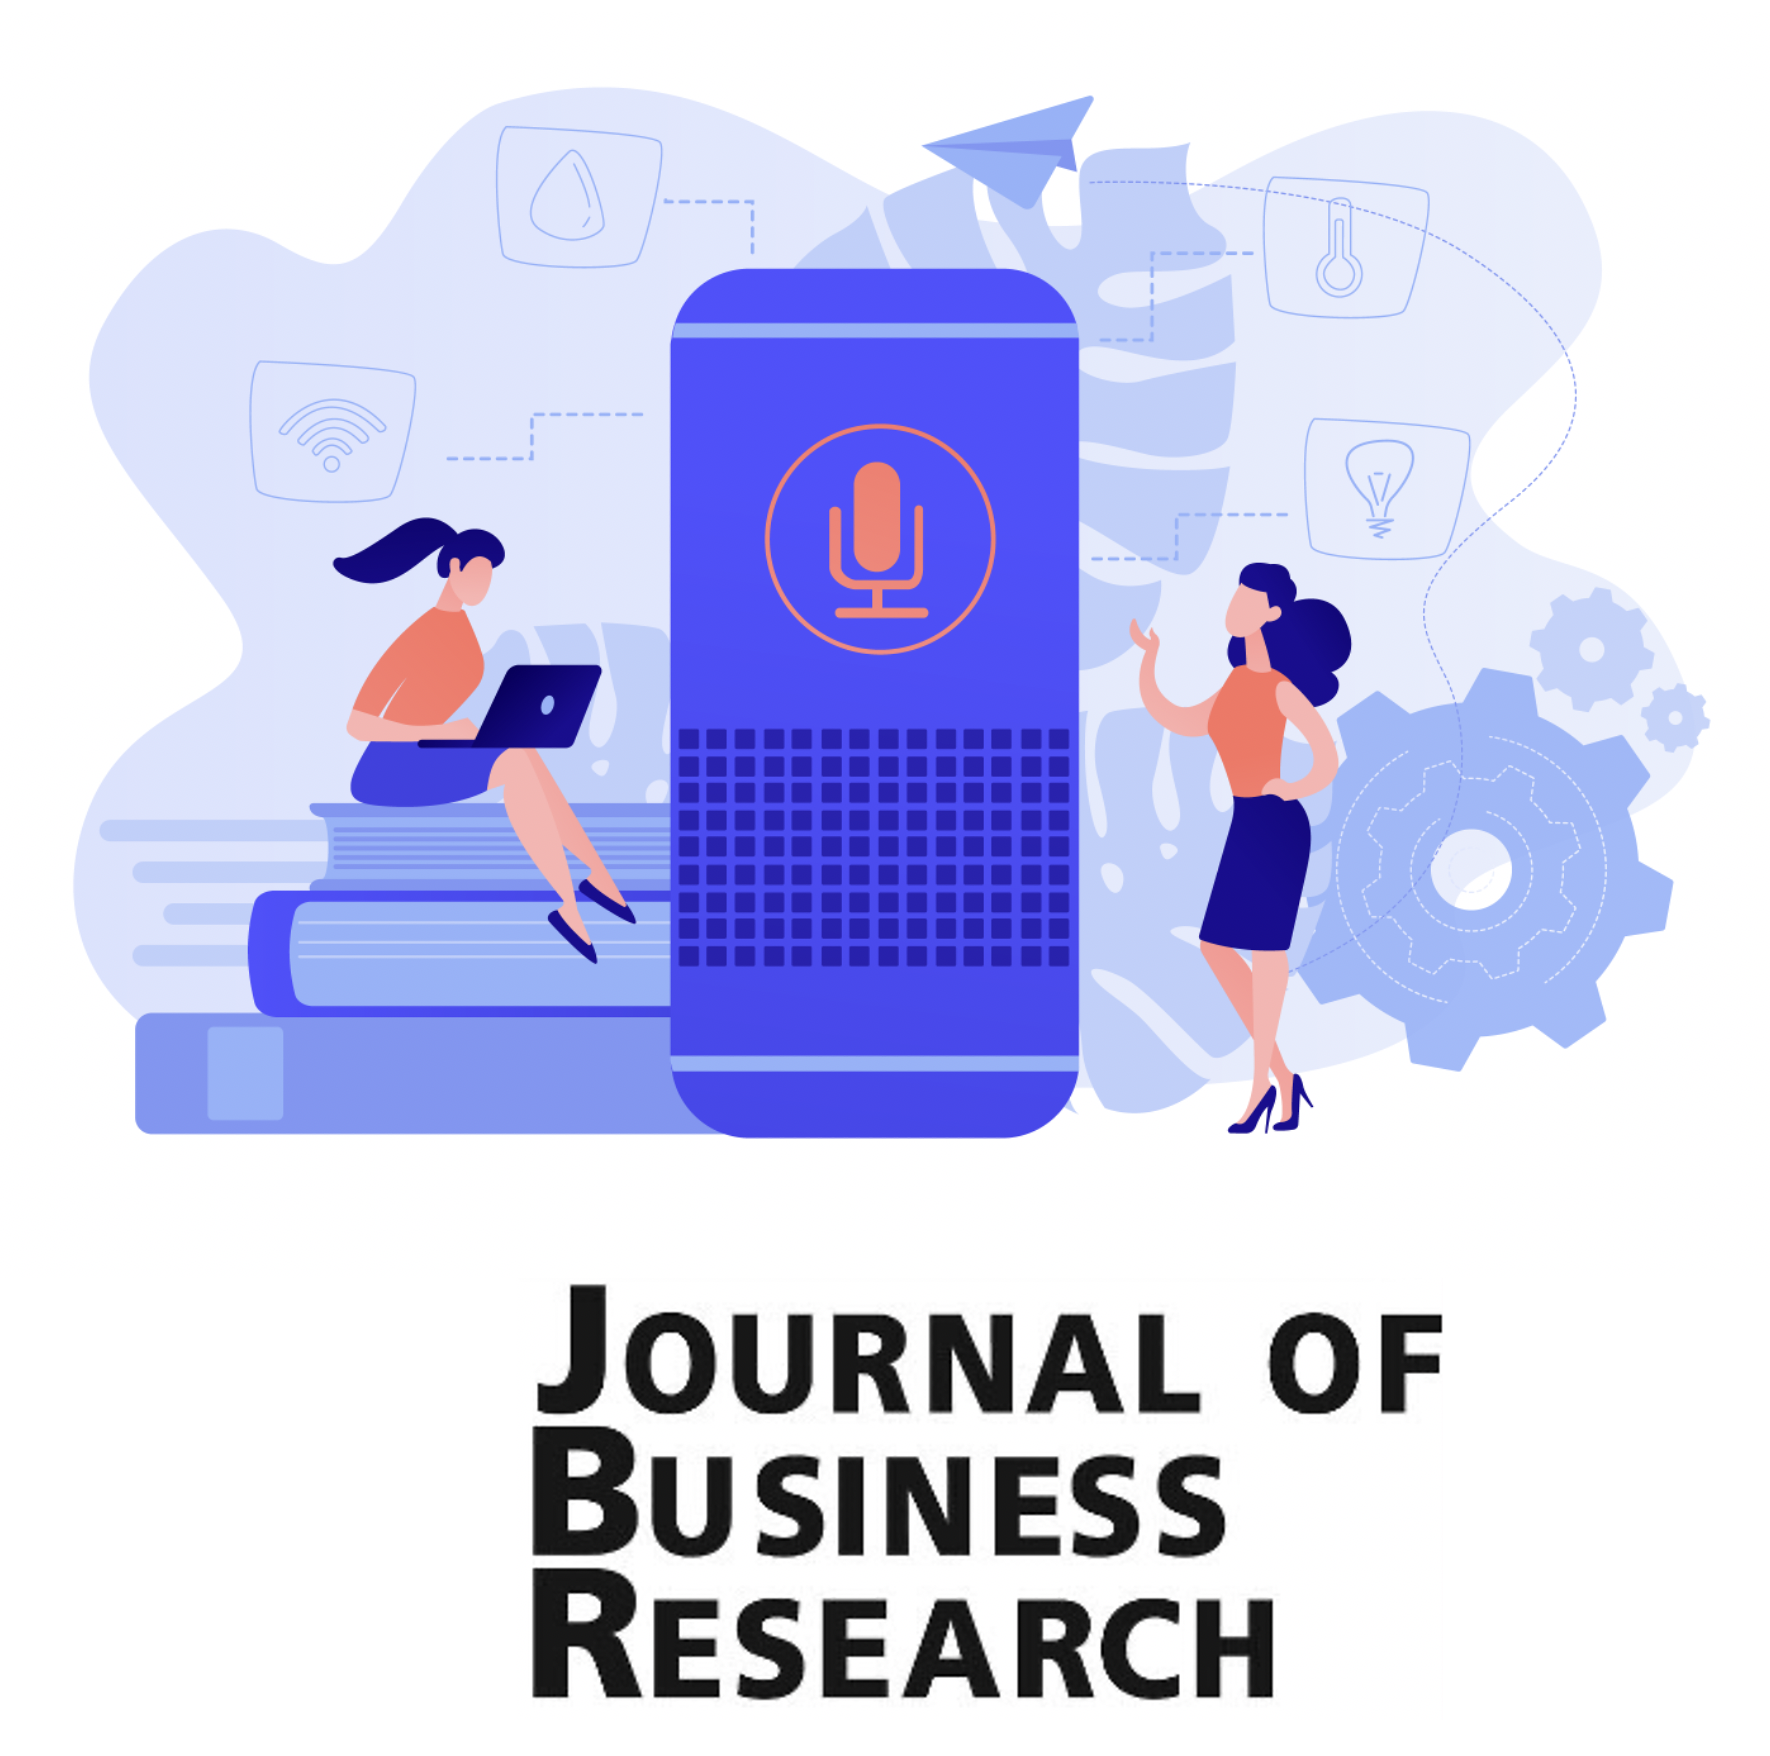 AI empathy research journal of business research